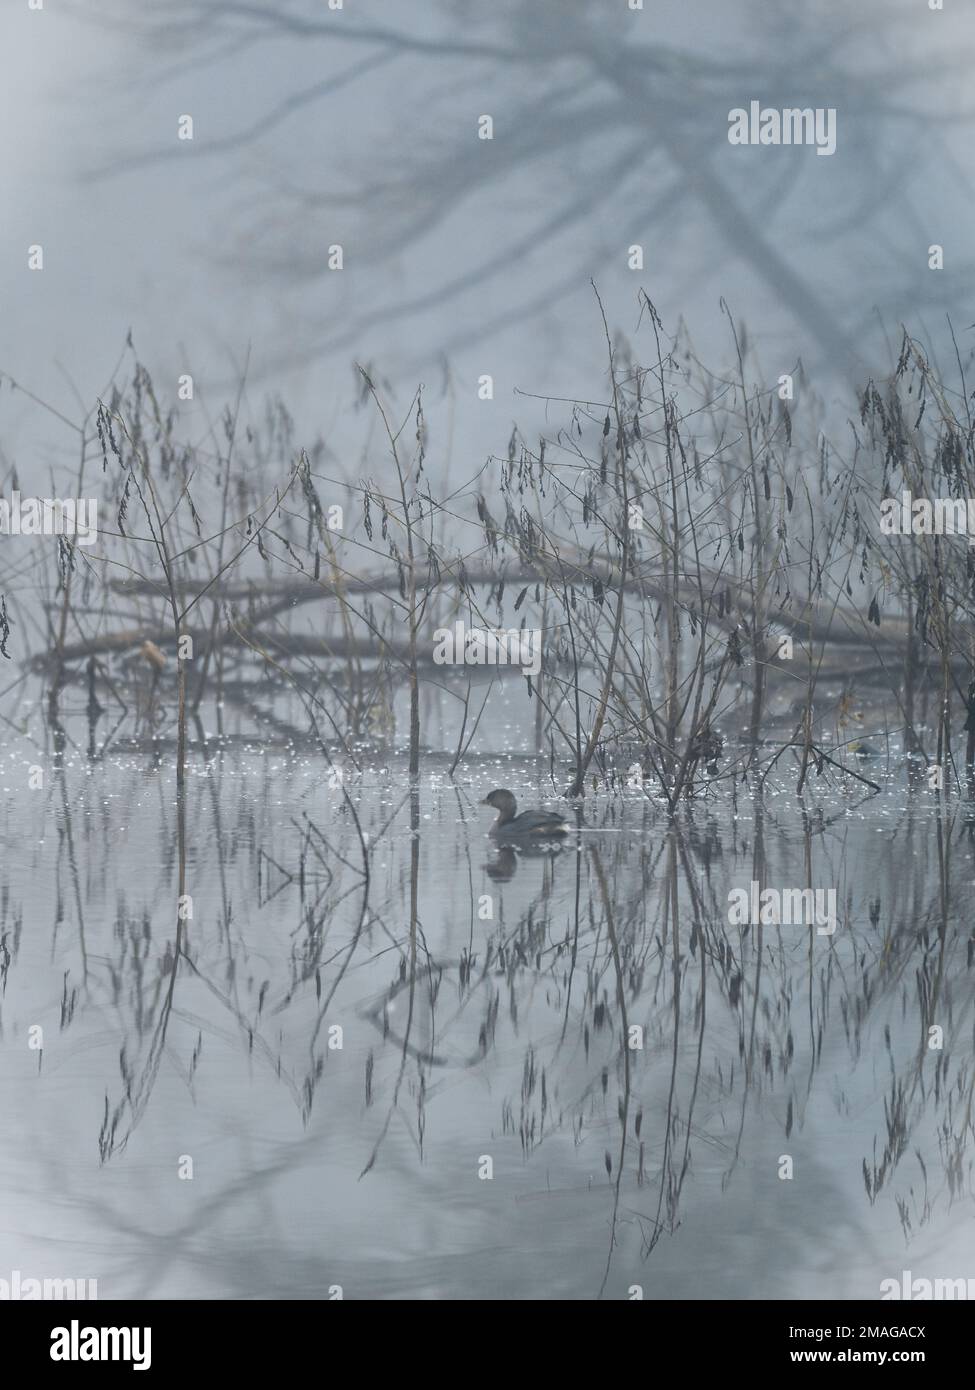 A mist envelops the pond on a winter morning, rendering the world in shades of grey. Stock Photo